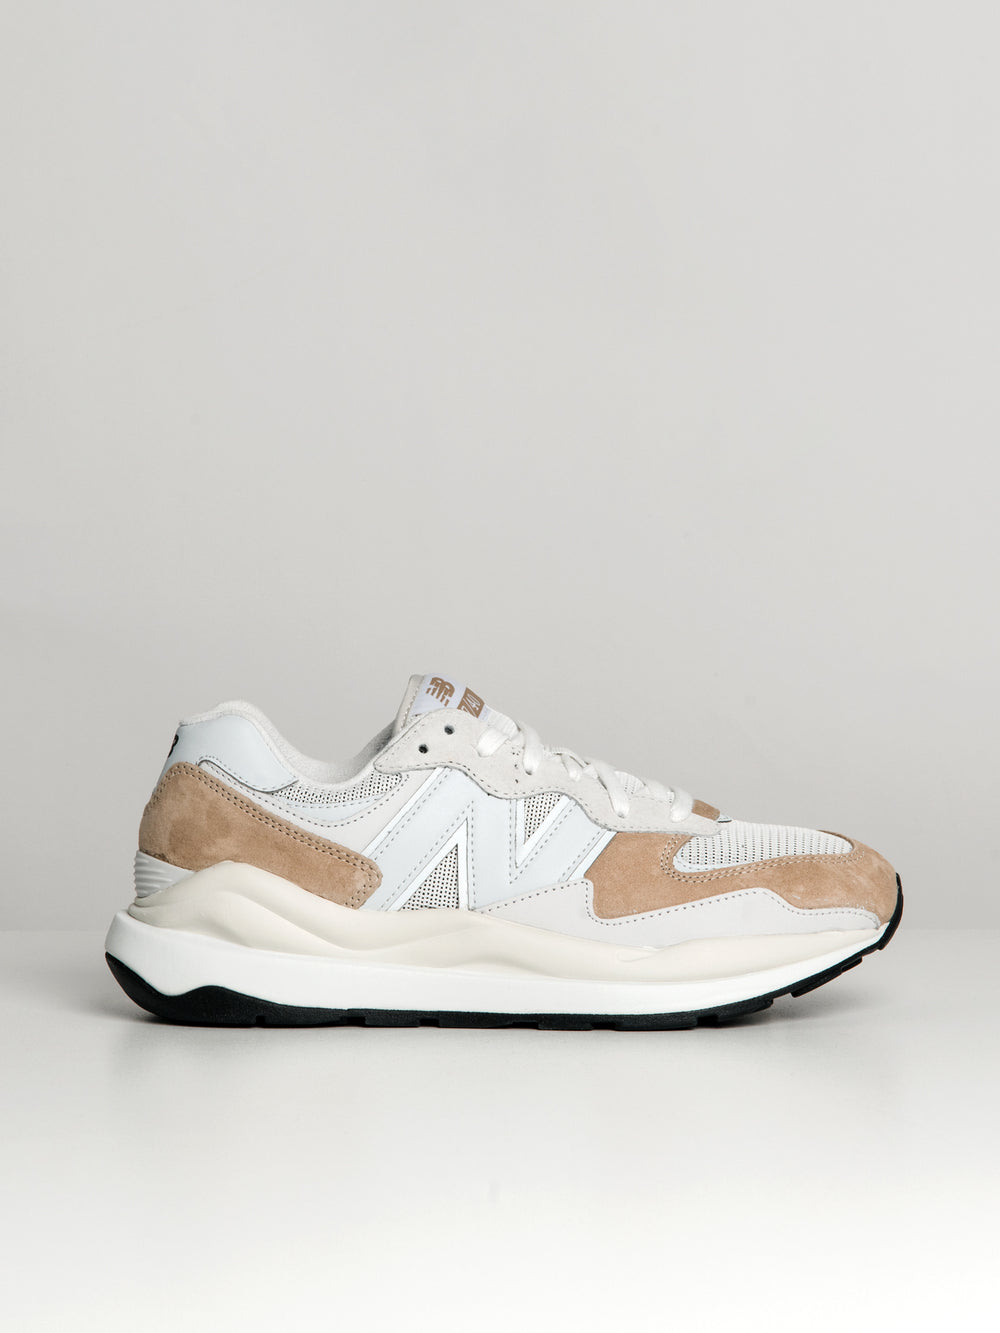 MENS NEW BALANCE THE 5740 SNEAKER - CLEARANCE